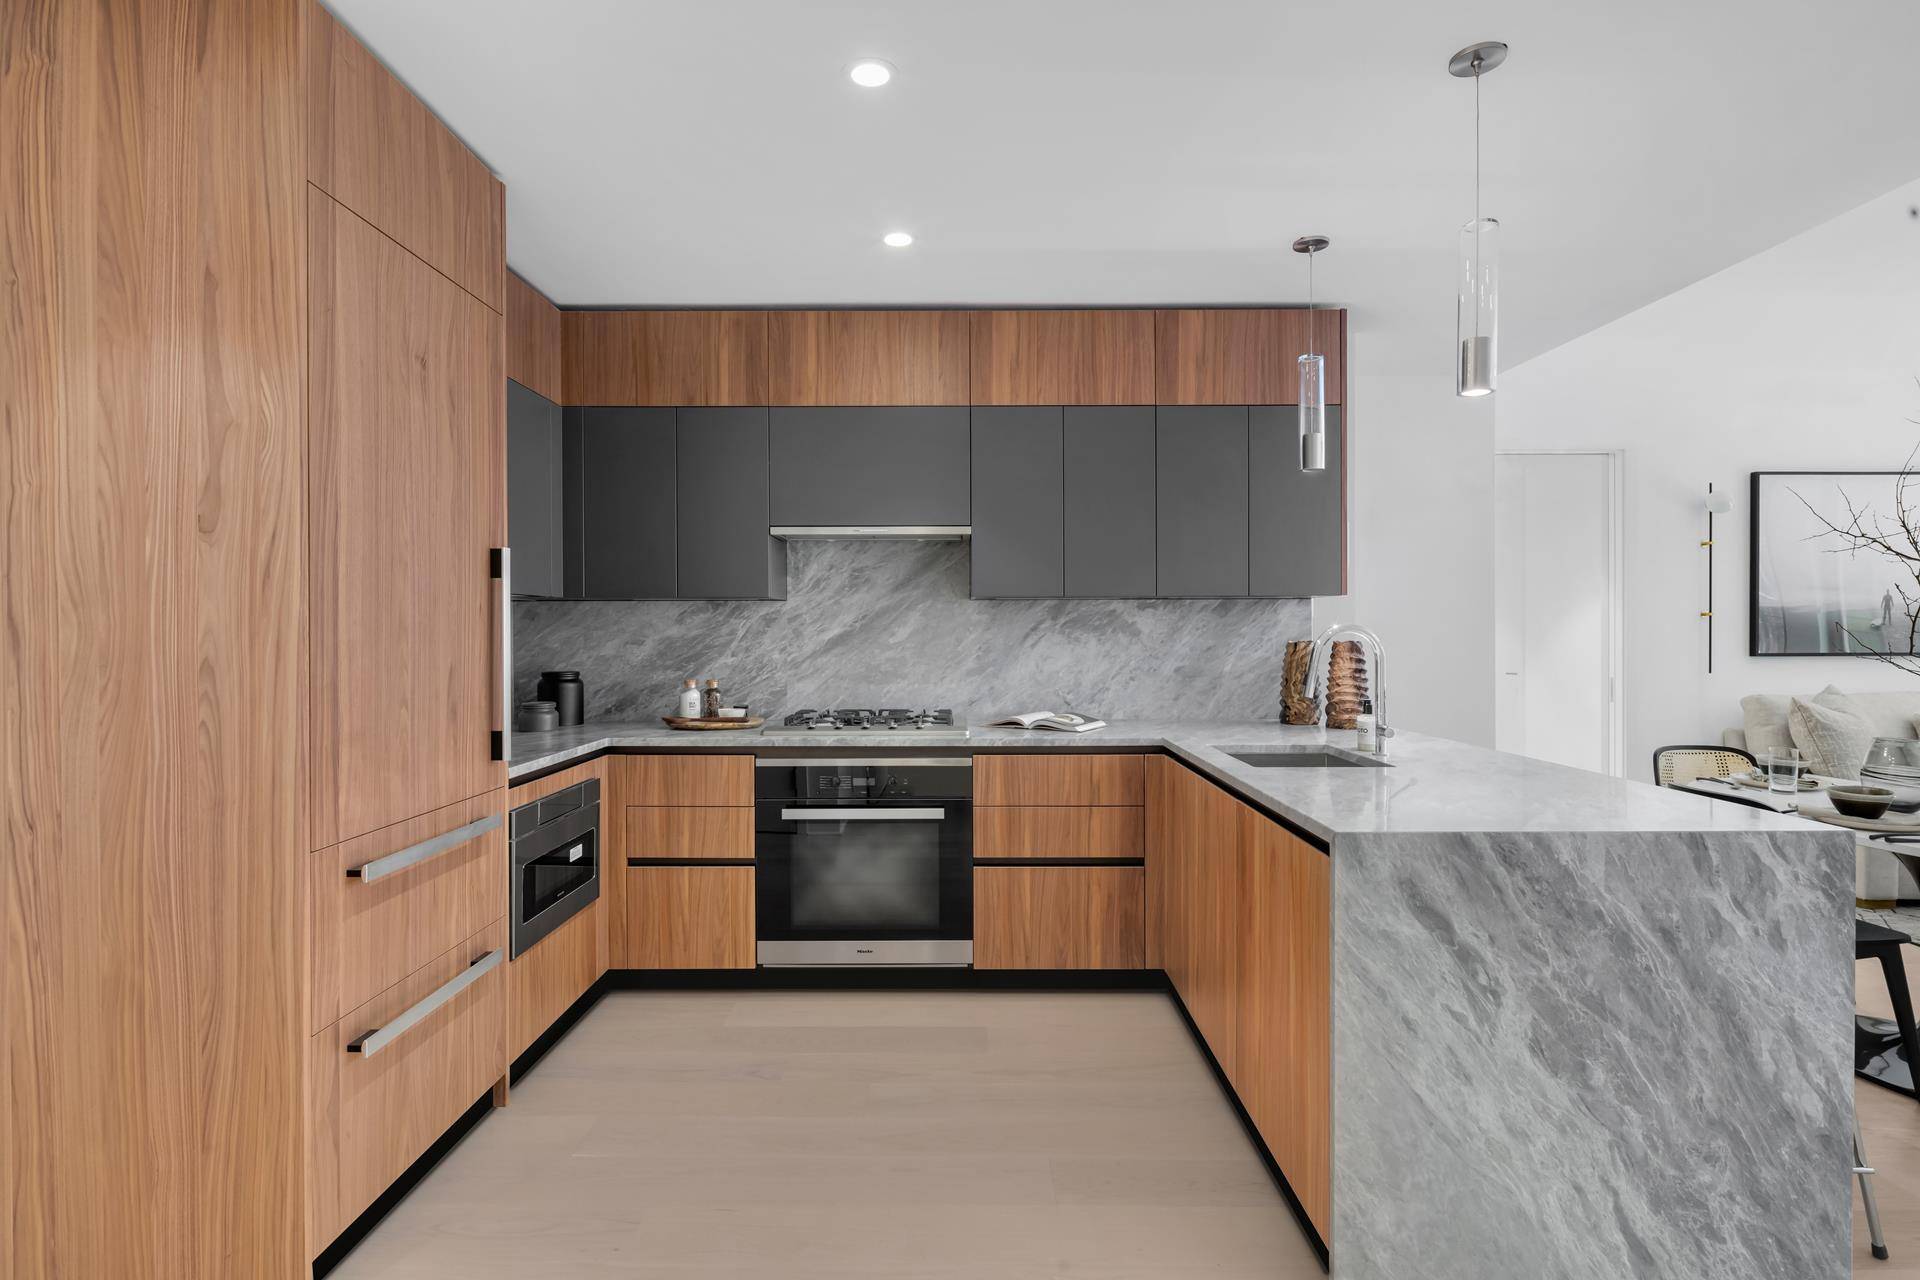 AVAILABLE FOR IMMEDIATE OCCUPANCY This spacious two bedroom, two bath residence at The Graydon features a 108 square foot balcony, sound attenuated oversized windows, 6 wide European white oak flooring ...